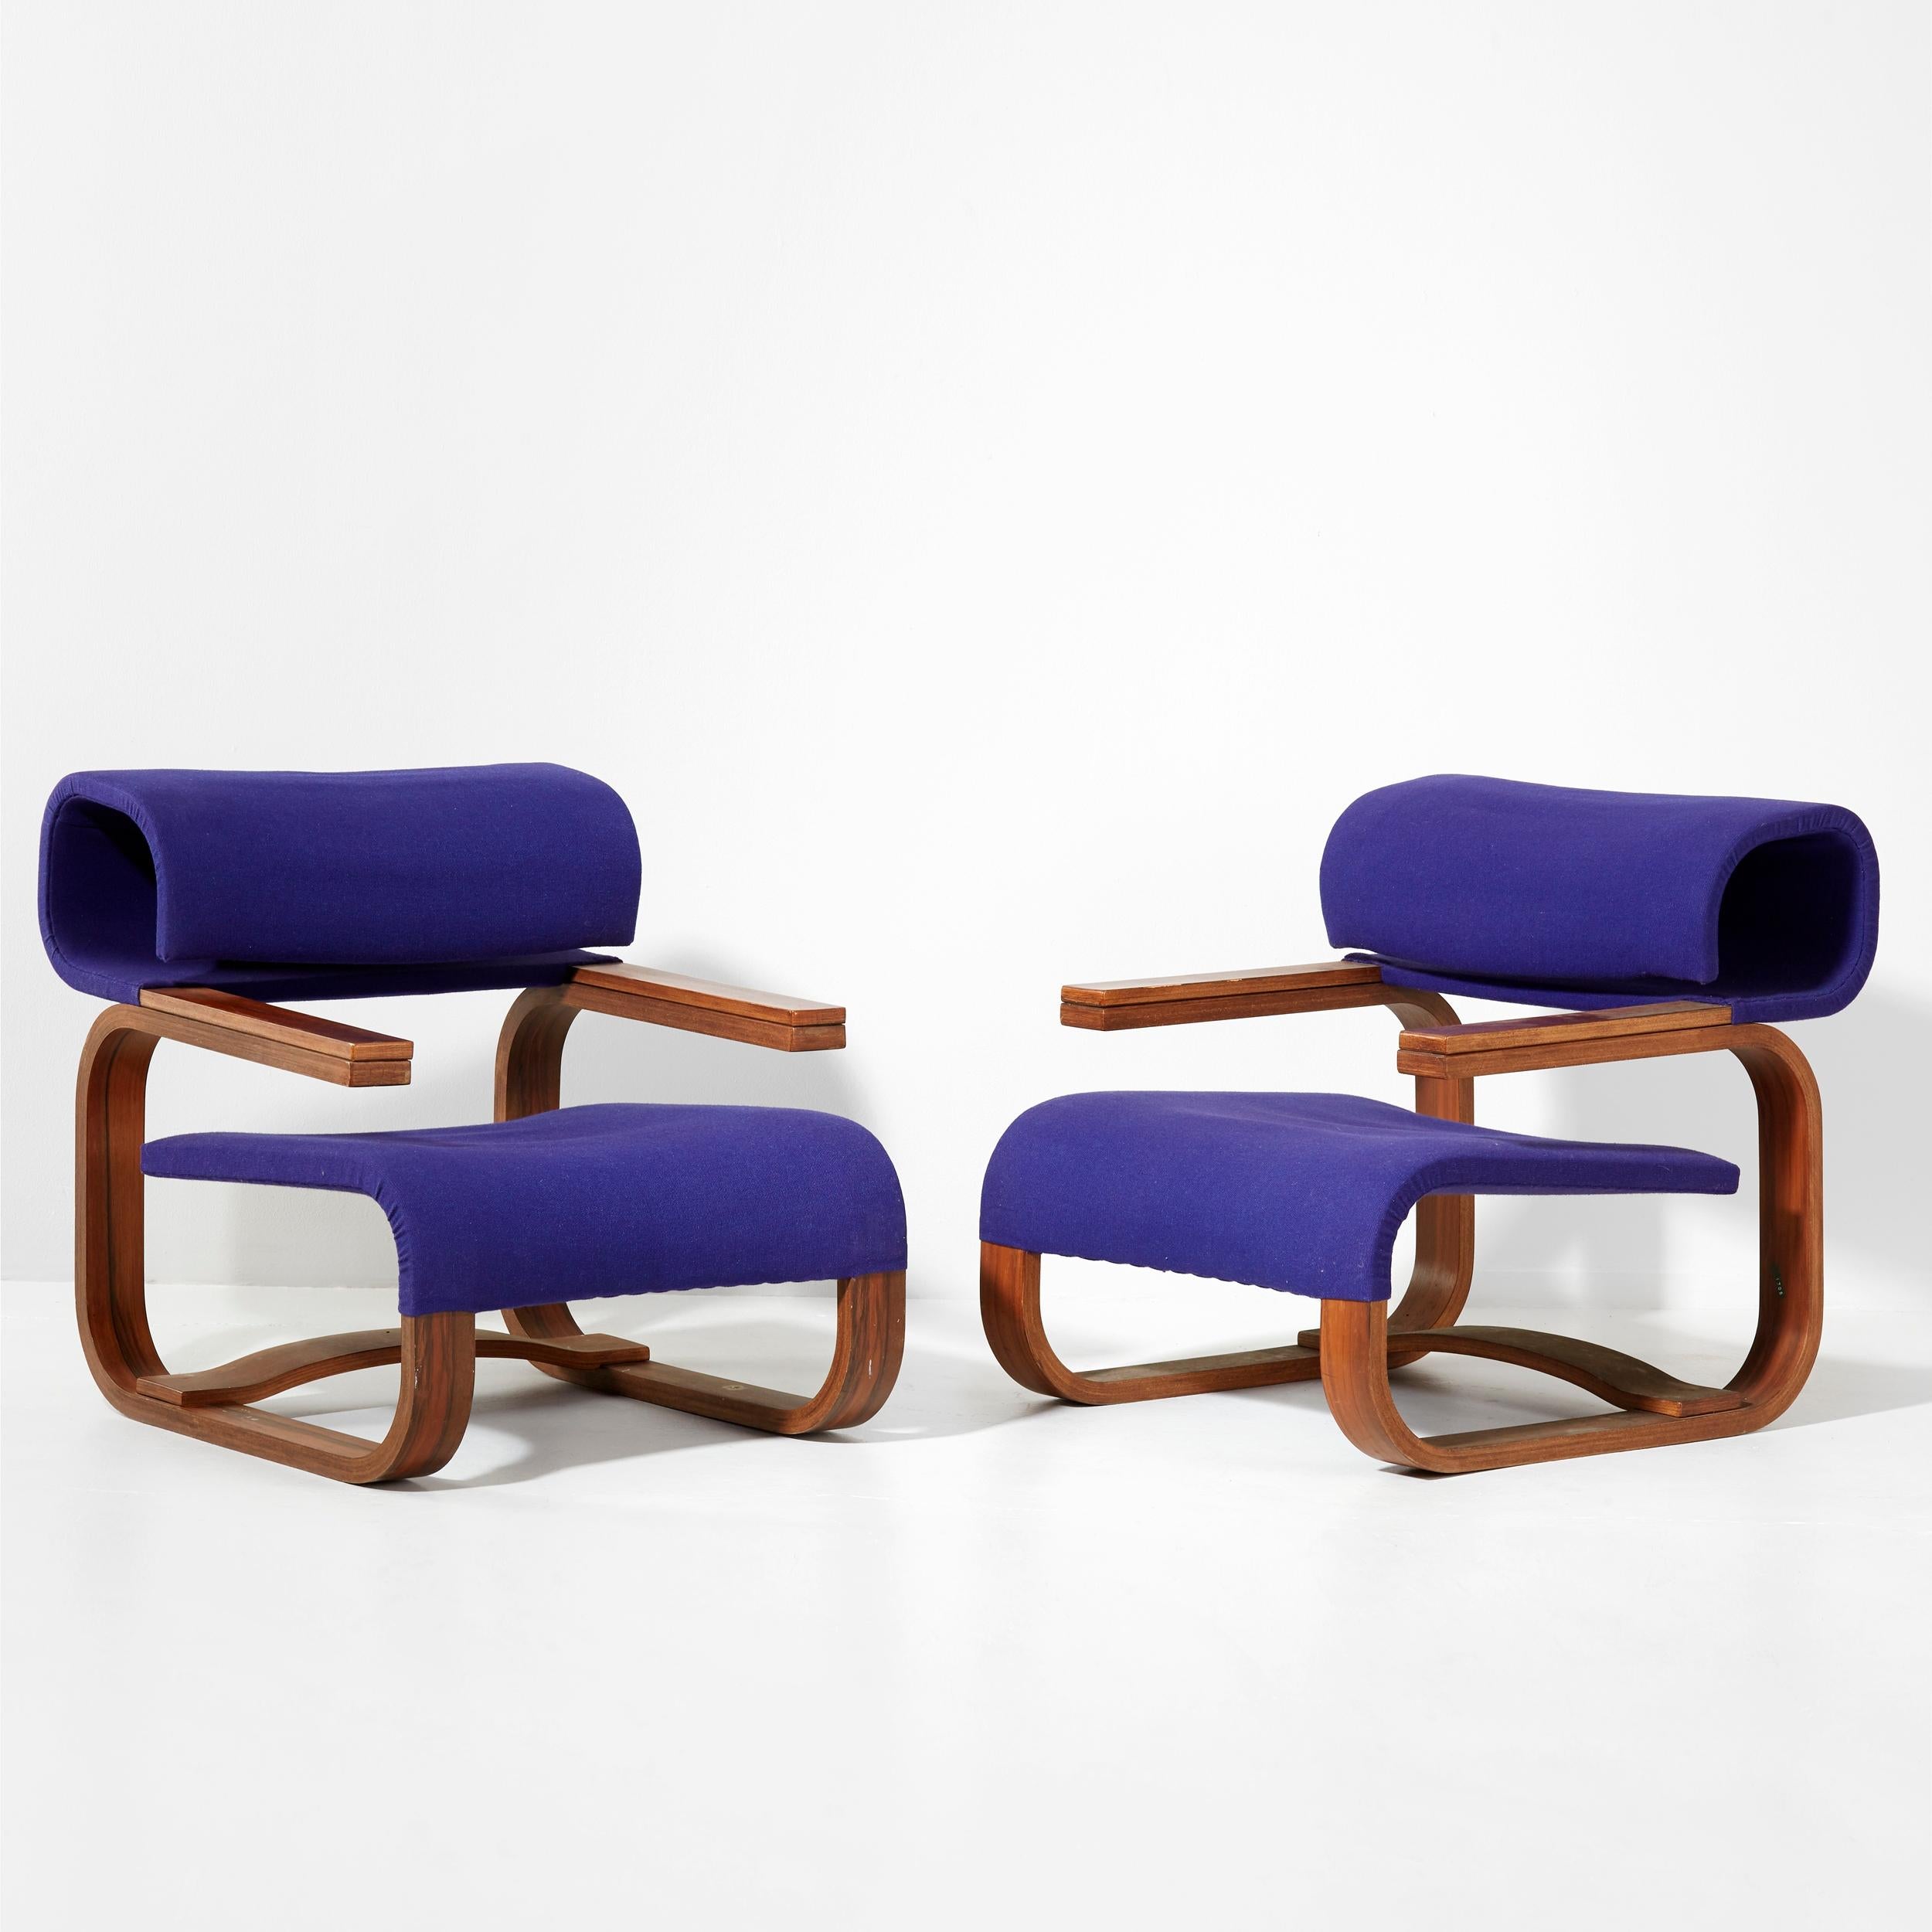 These arms chair are designed by the architect Jan Bocan for the Czechoslovakian embassy in Stockholm built in 1972.
Bocan designed the building as well as the furniture. Those chairs have been only built for the building and made by the famous